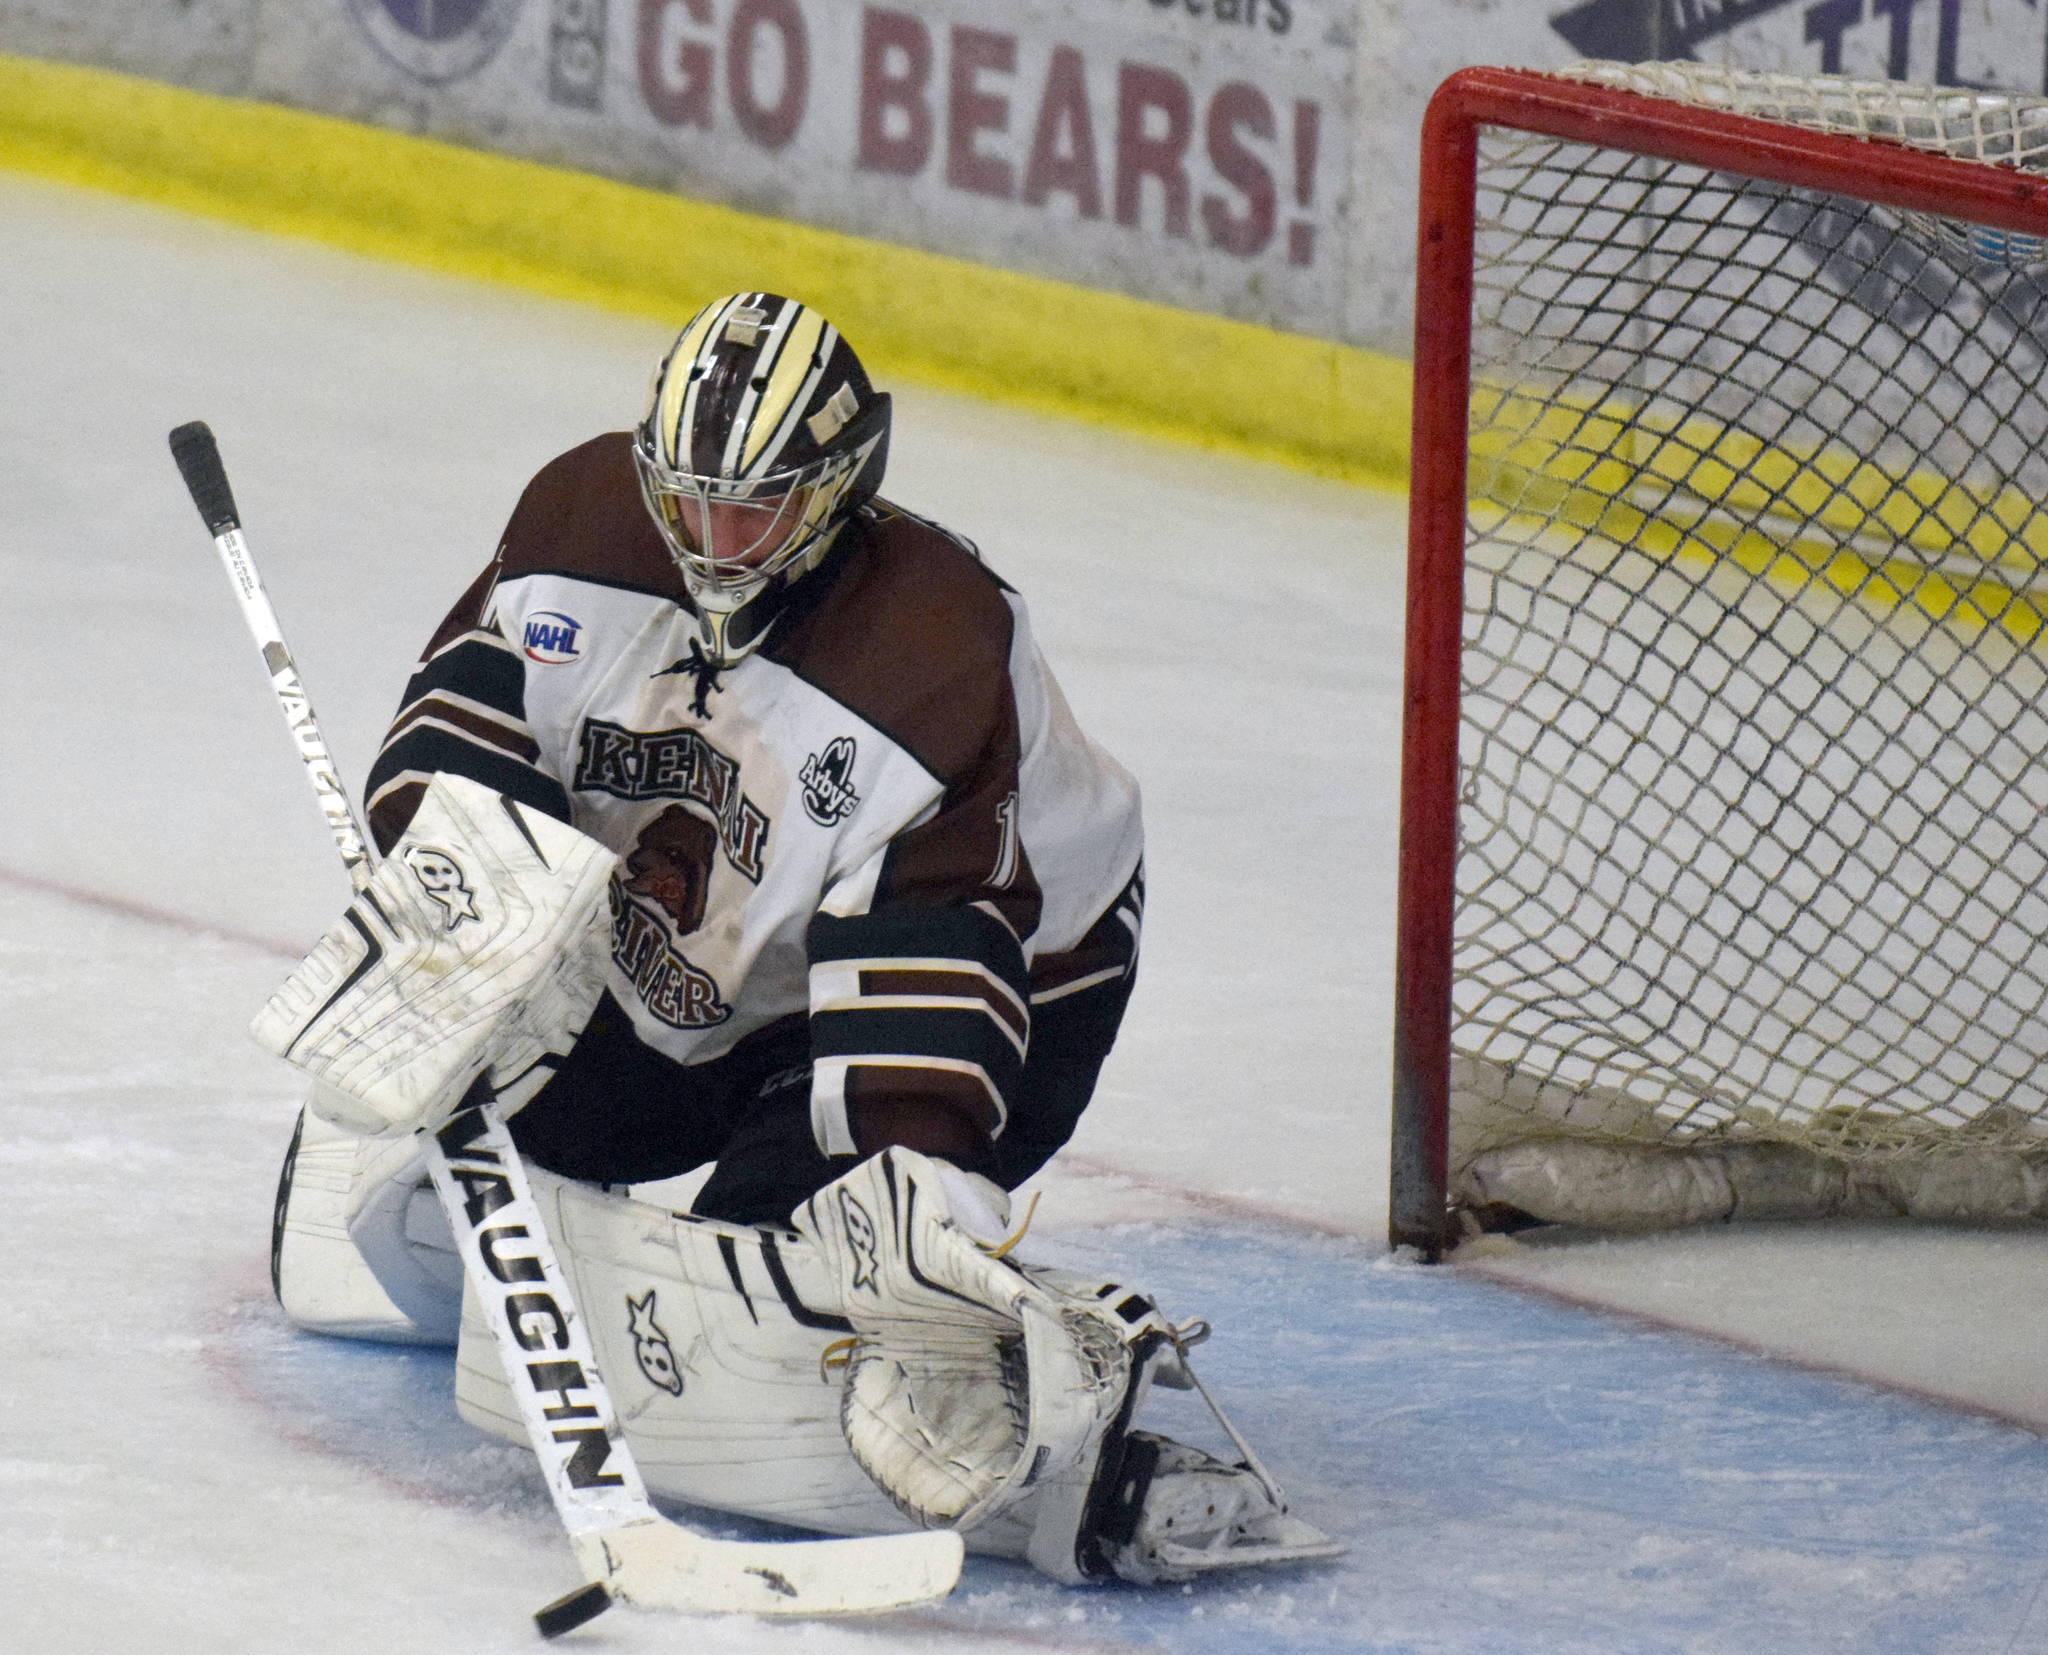 Kenai River goaltender Gavin Enright makes one of 28 saves on the way to shutting out the Chippewa (Wisconsin) Steel on Friday, Oct. 5, 2018, at the Soldotna Regional Sports Complex. (Photo by Jeff Helminiak/Peninsula Clarion)